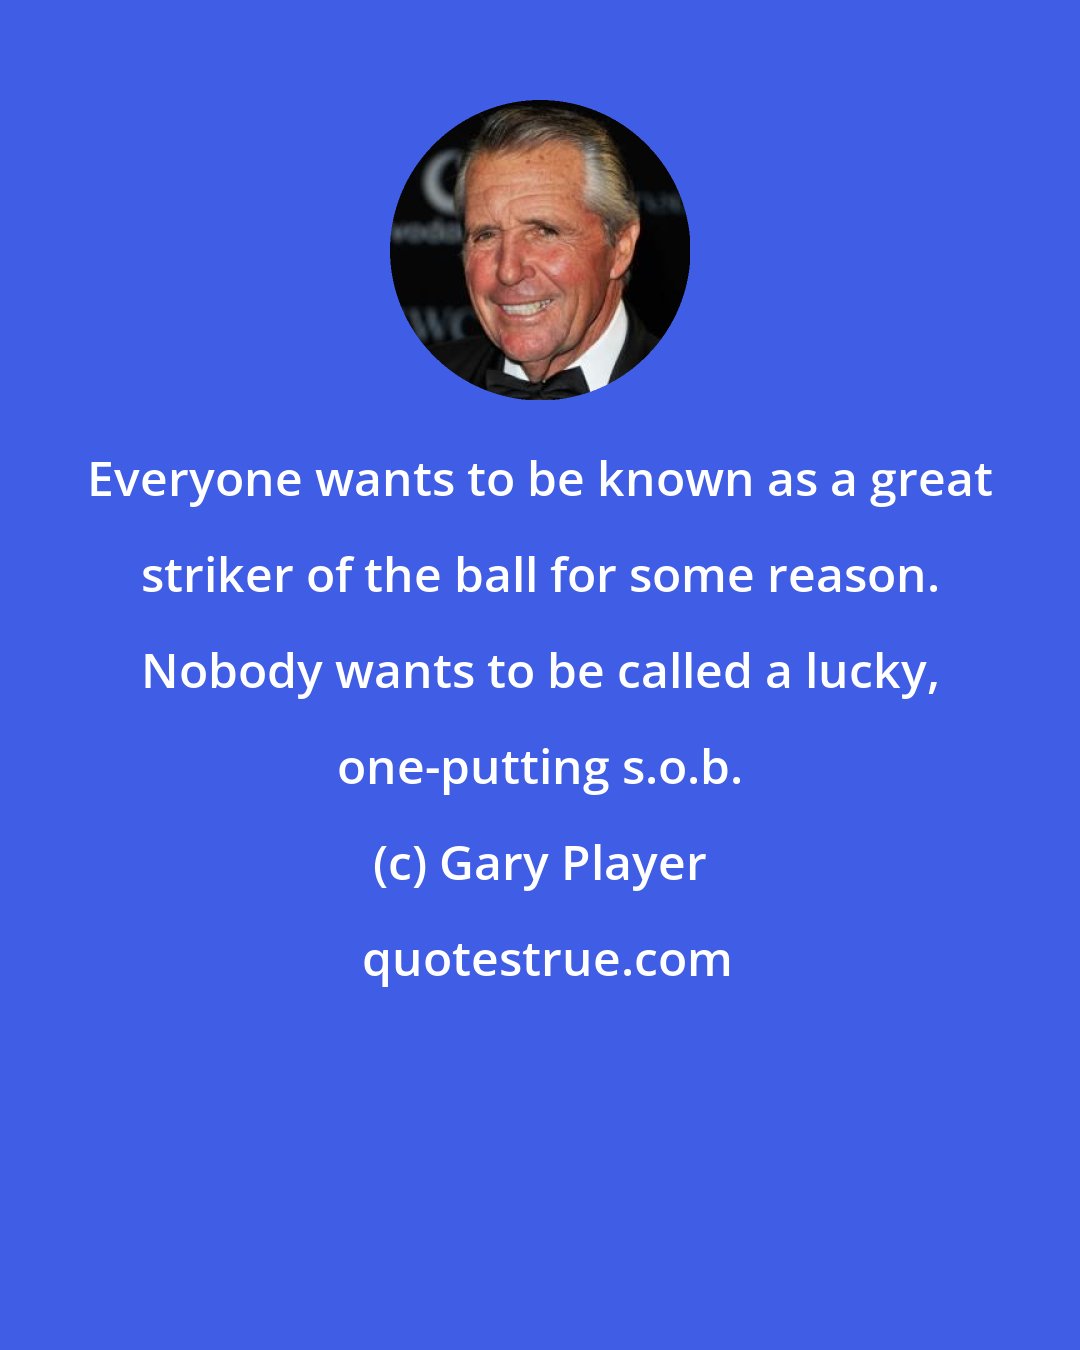 Gary Player: Everyone wants to be known as a great striker of the ball for some reason. Nobody wants to be called a lucky, one-putting s.o.b.